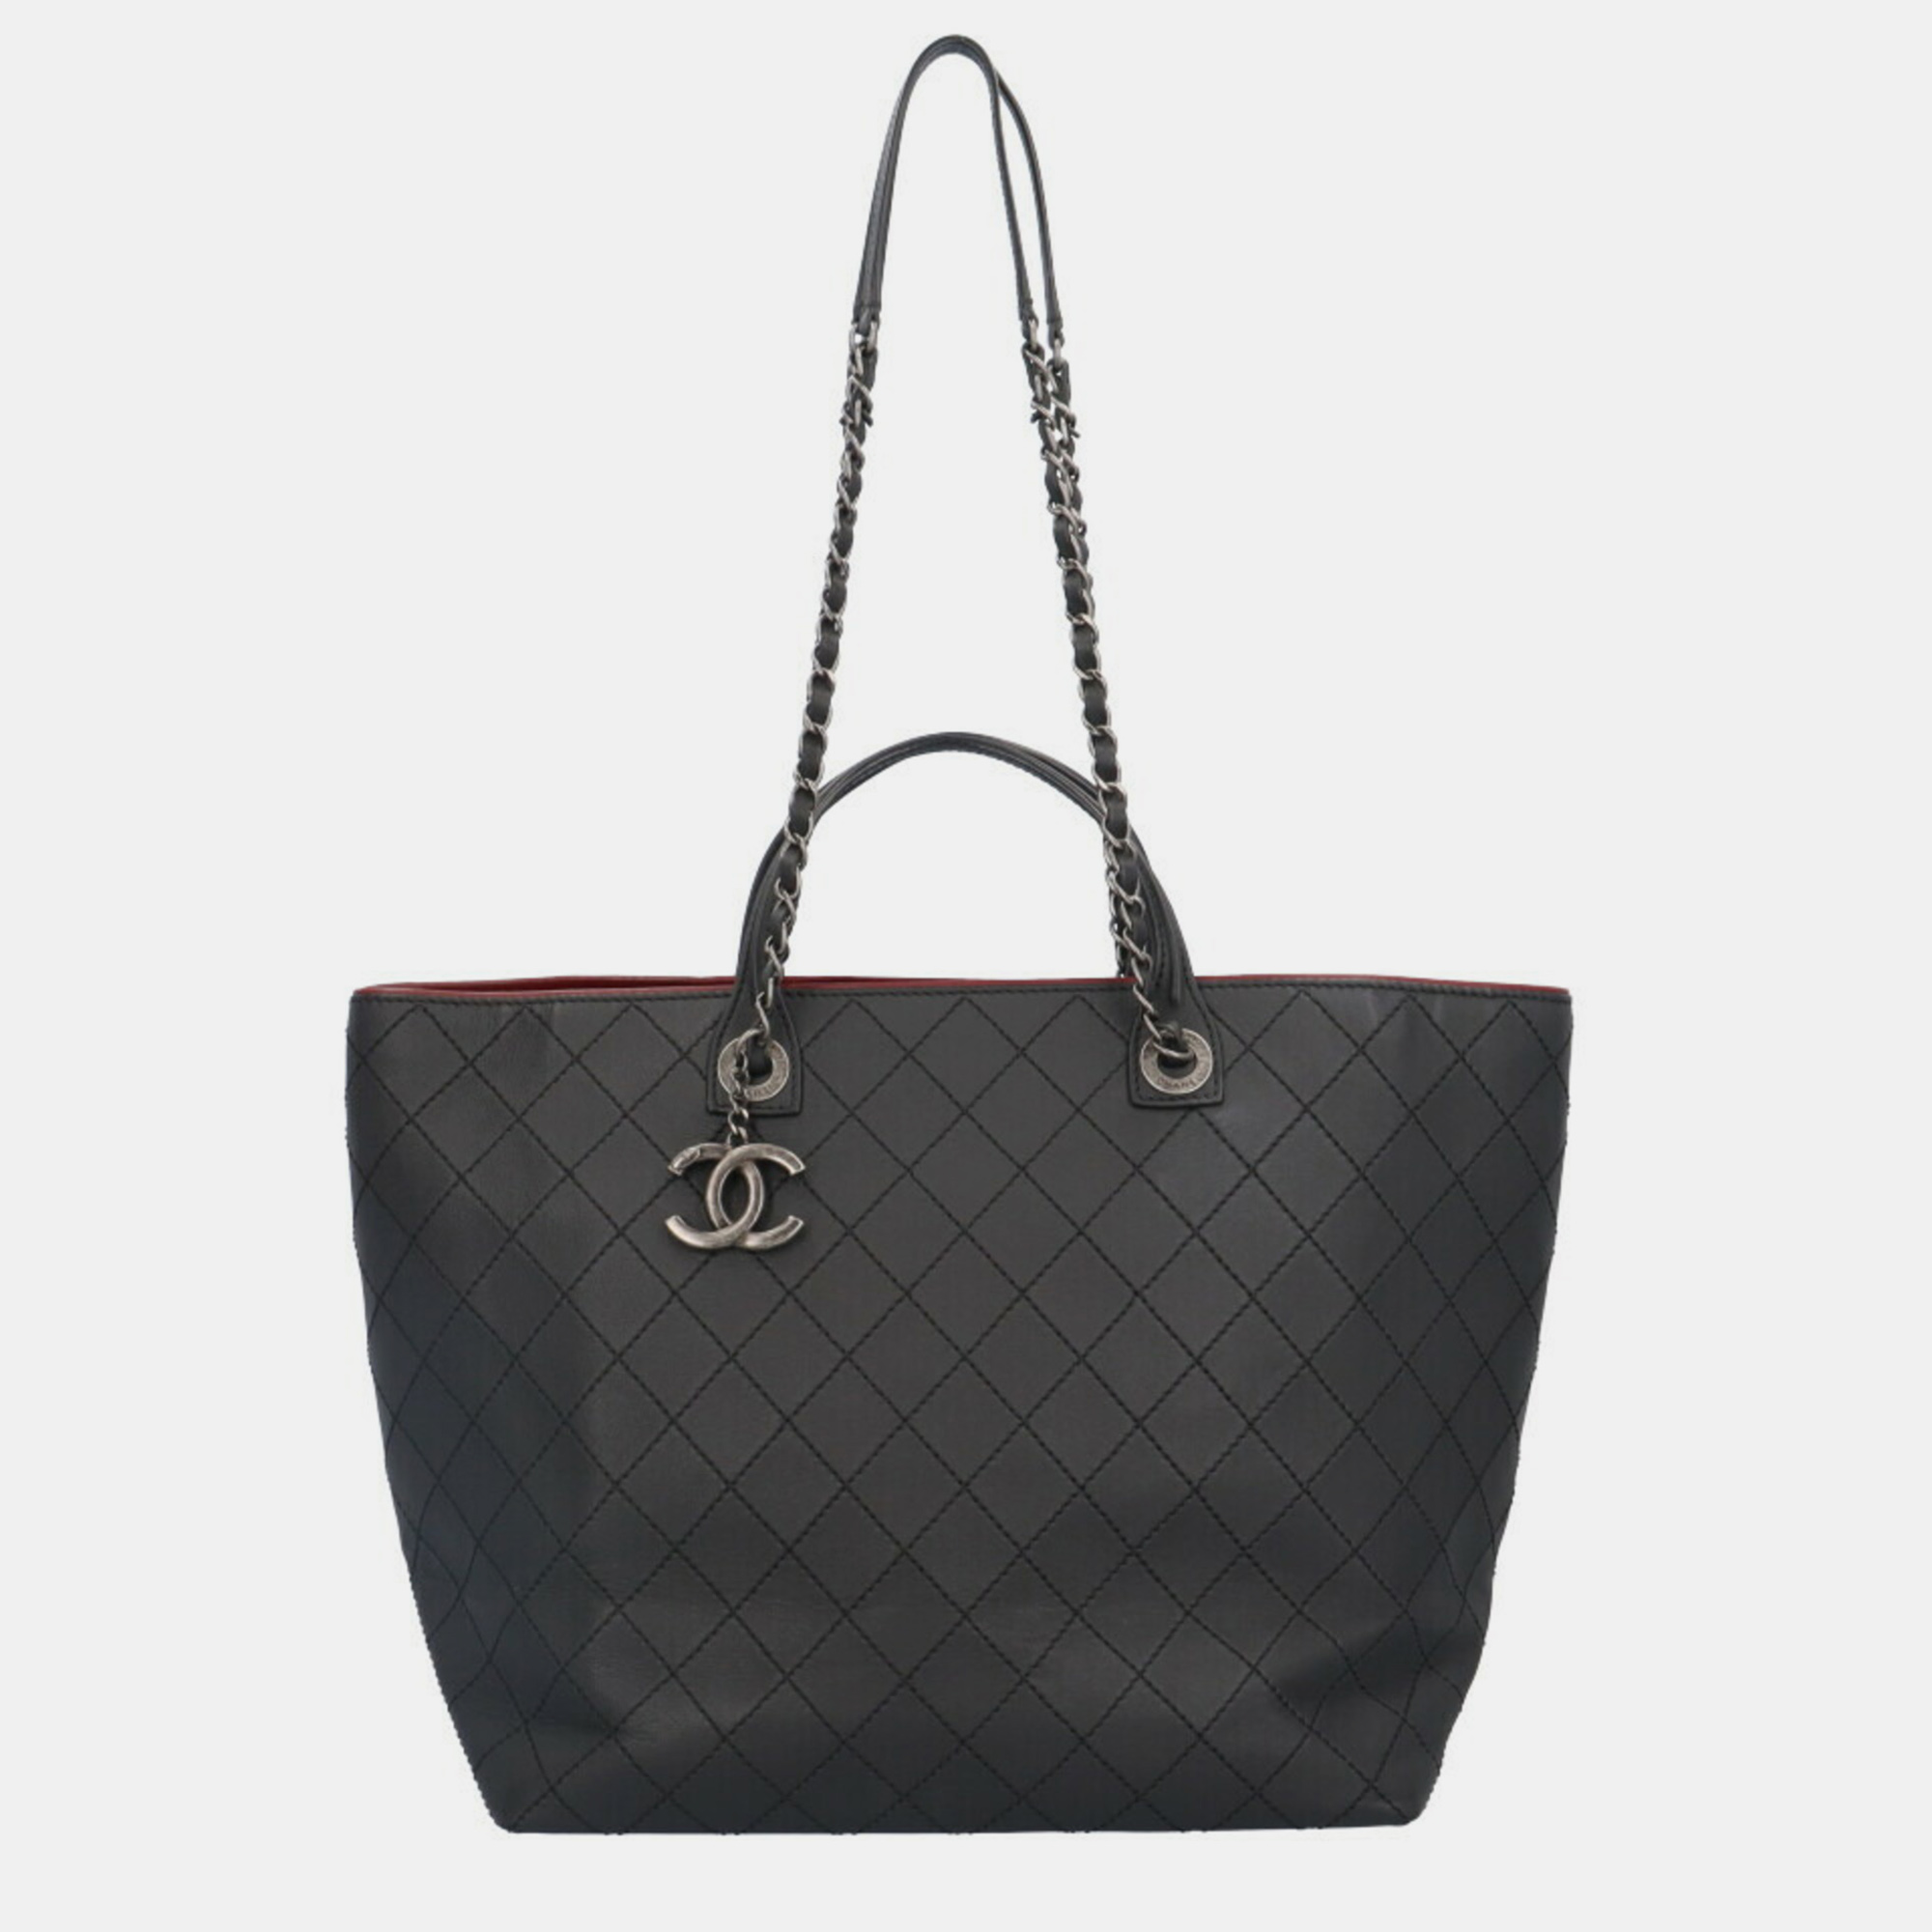 Chanel black wild stitch caviar large shopping in chains tote